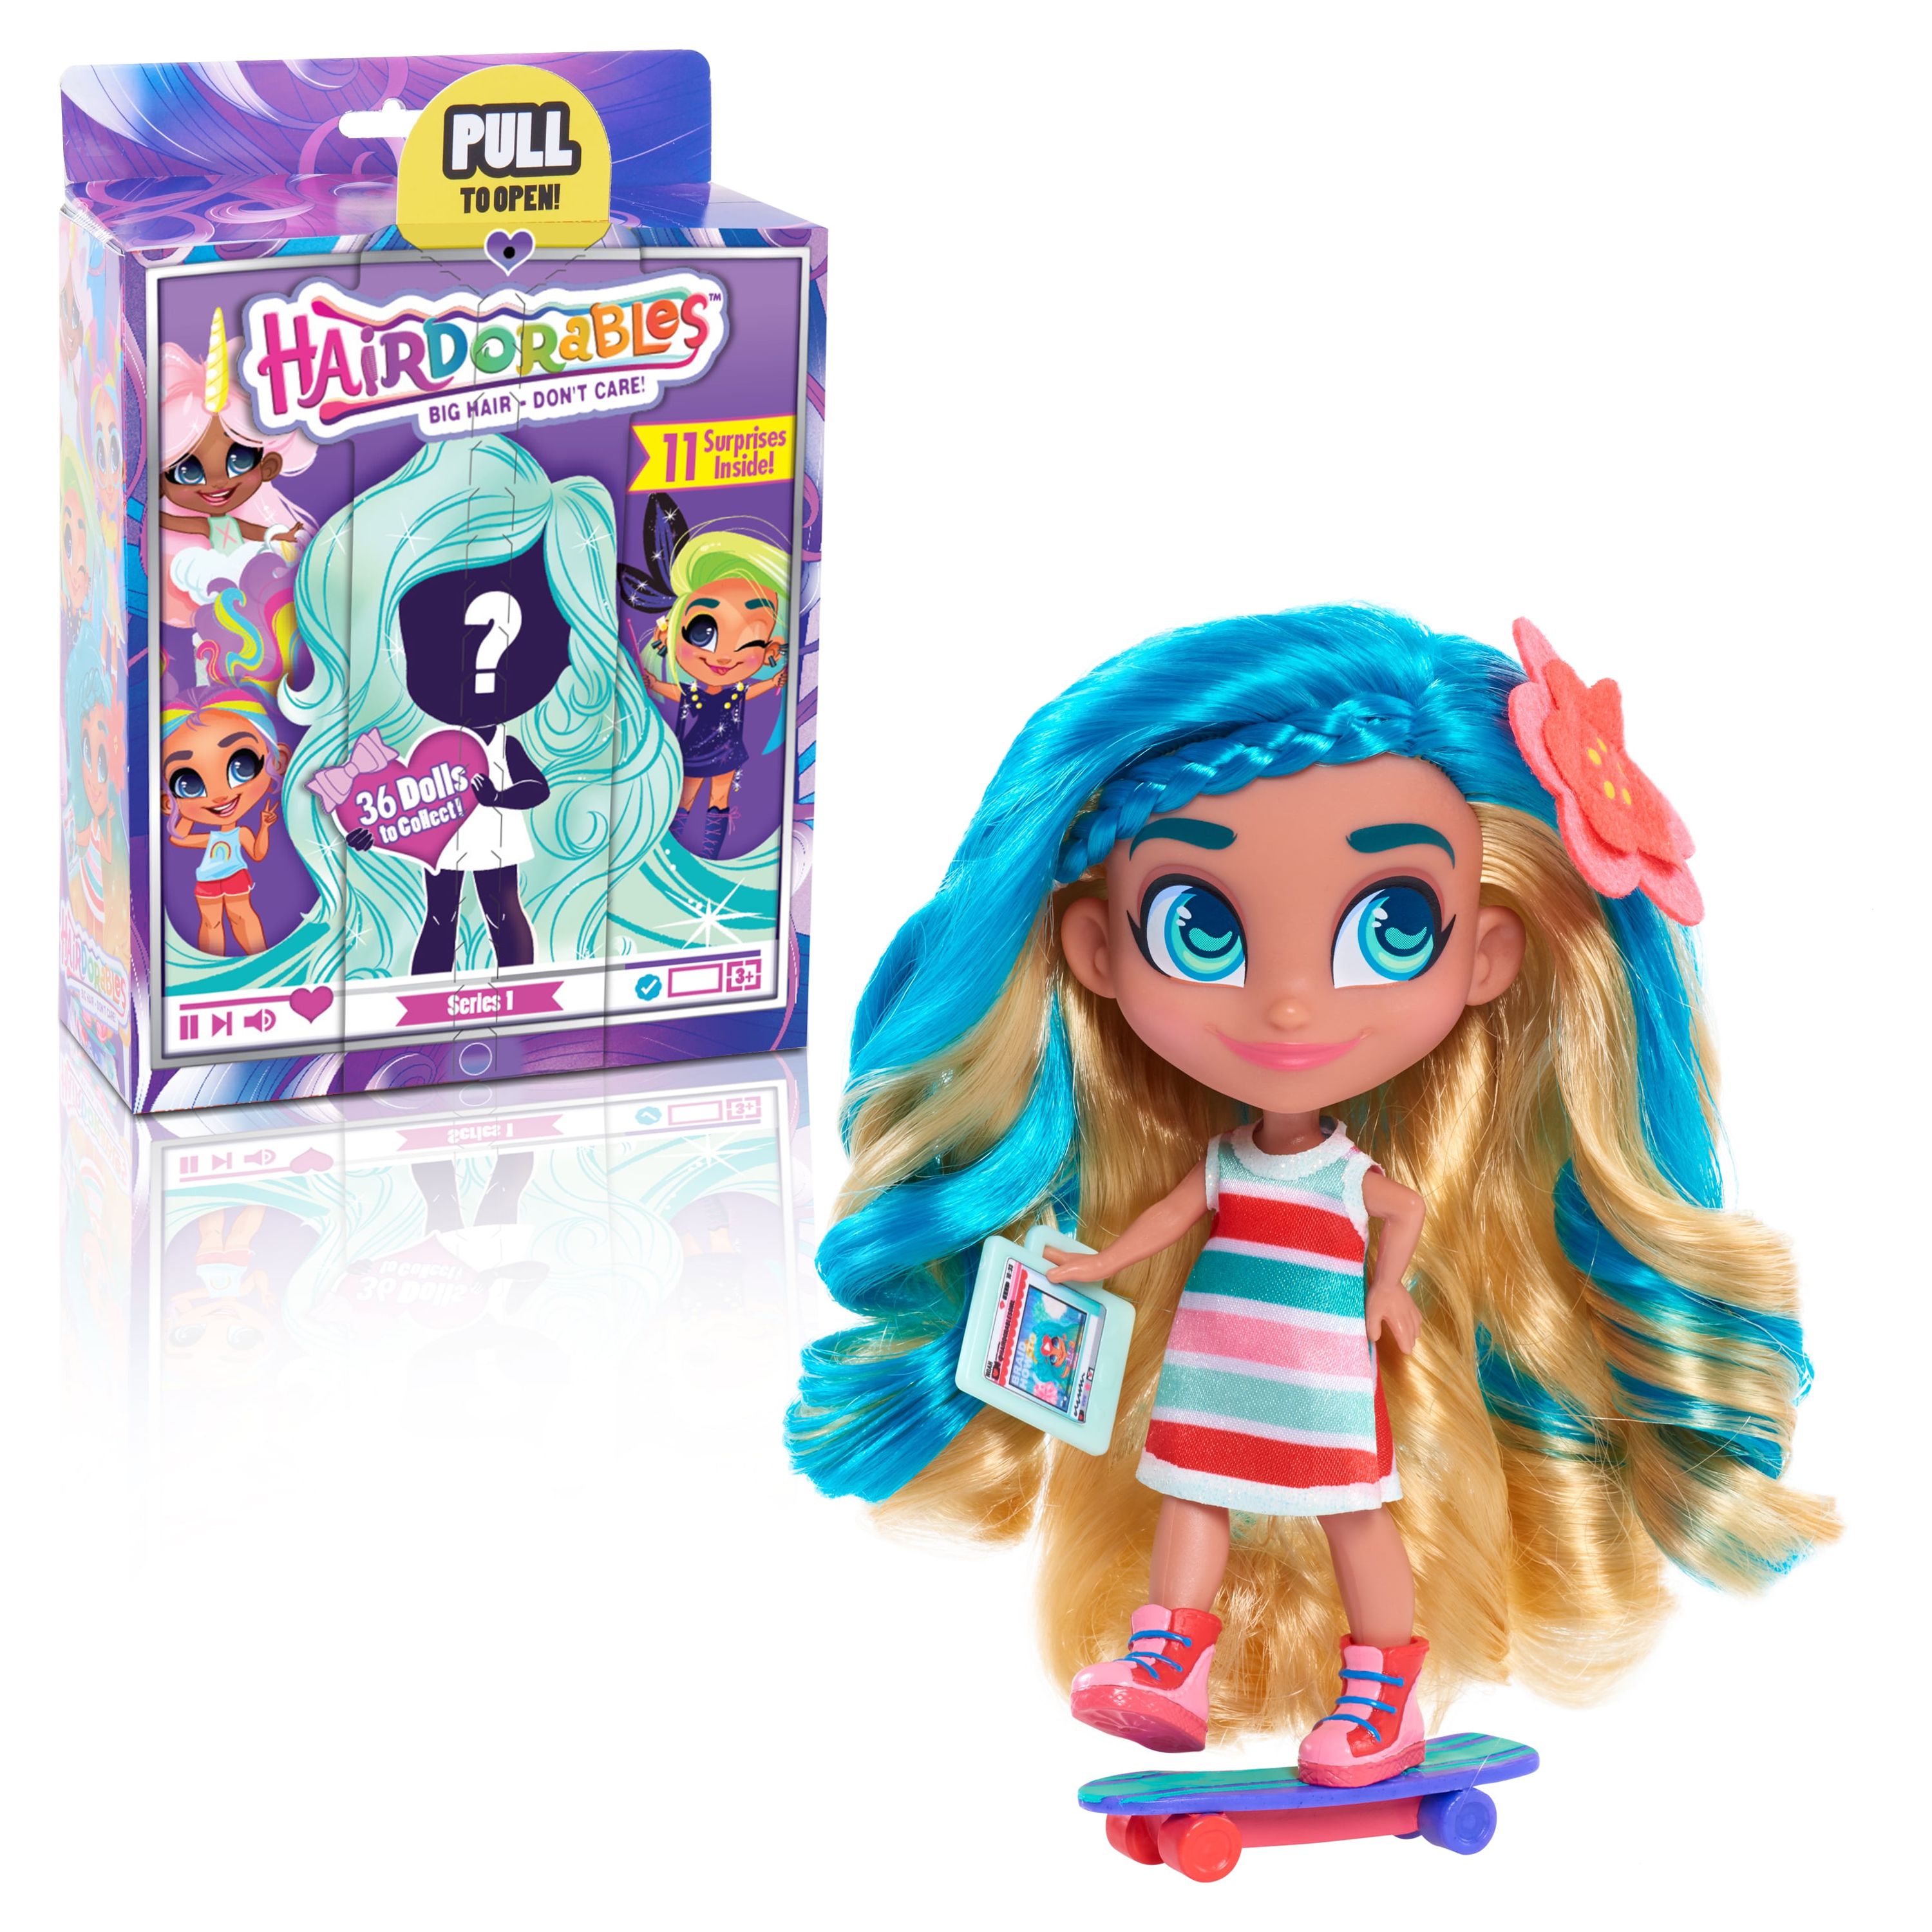 Hairdorables Collectible Dolls - image 1 of 10